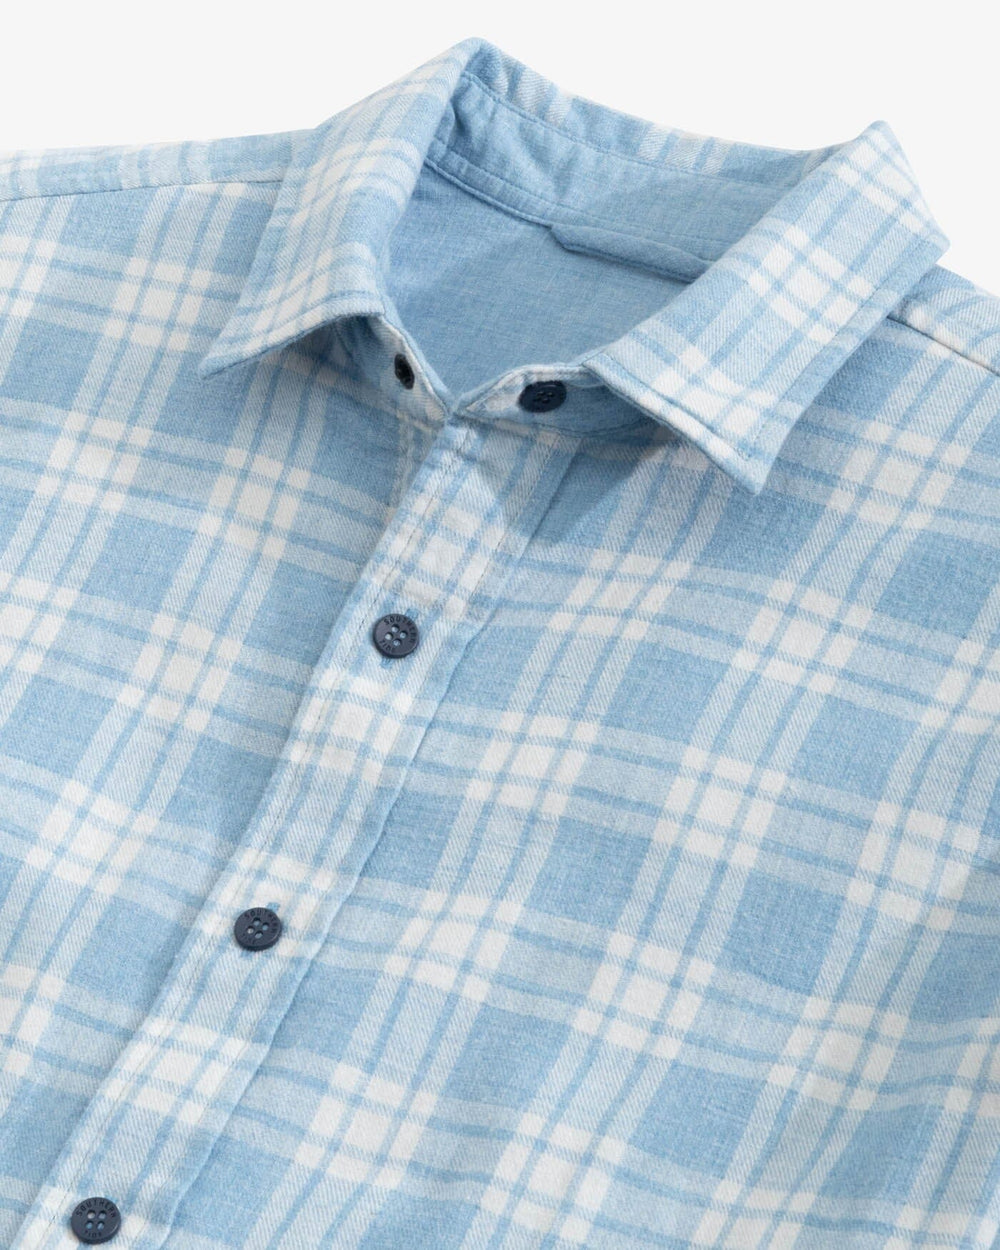 The detail view of the Southern Tide Heather Melbourne Reversible Plaid Sport Shirt by Southern Tide - Heather Mountain Spring Blue